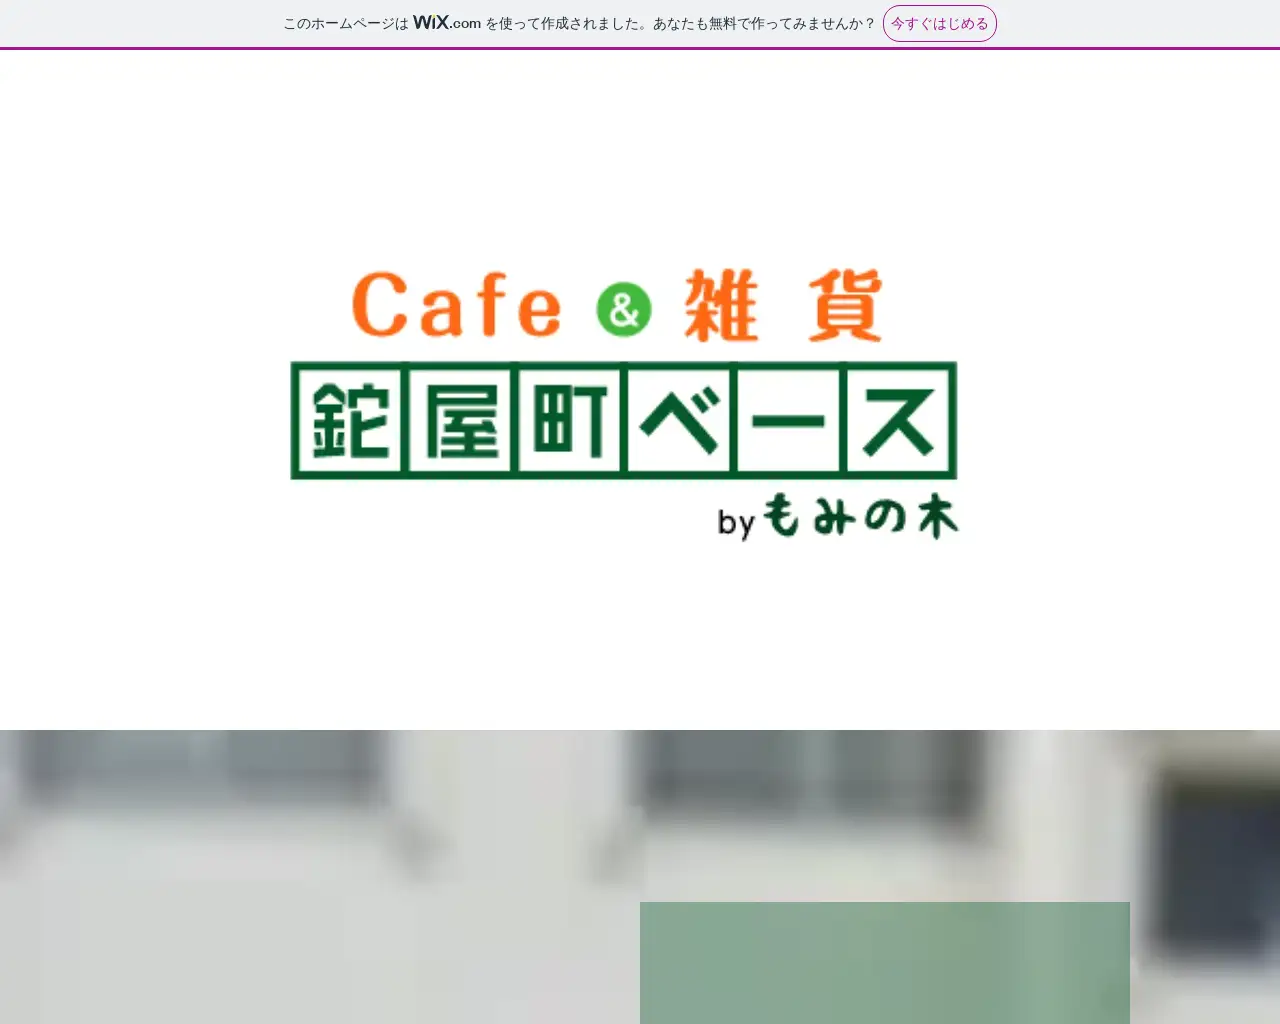 Cafe&雑貨 鉈屋町ベース by もみの木 site